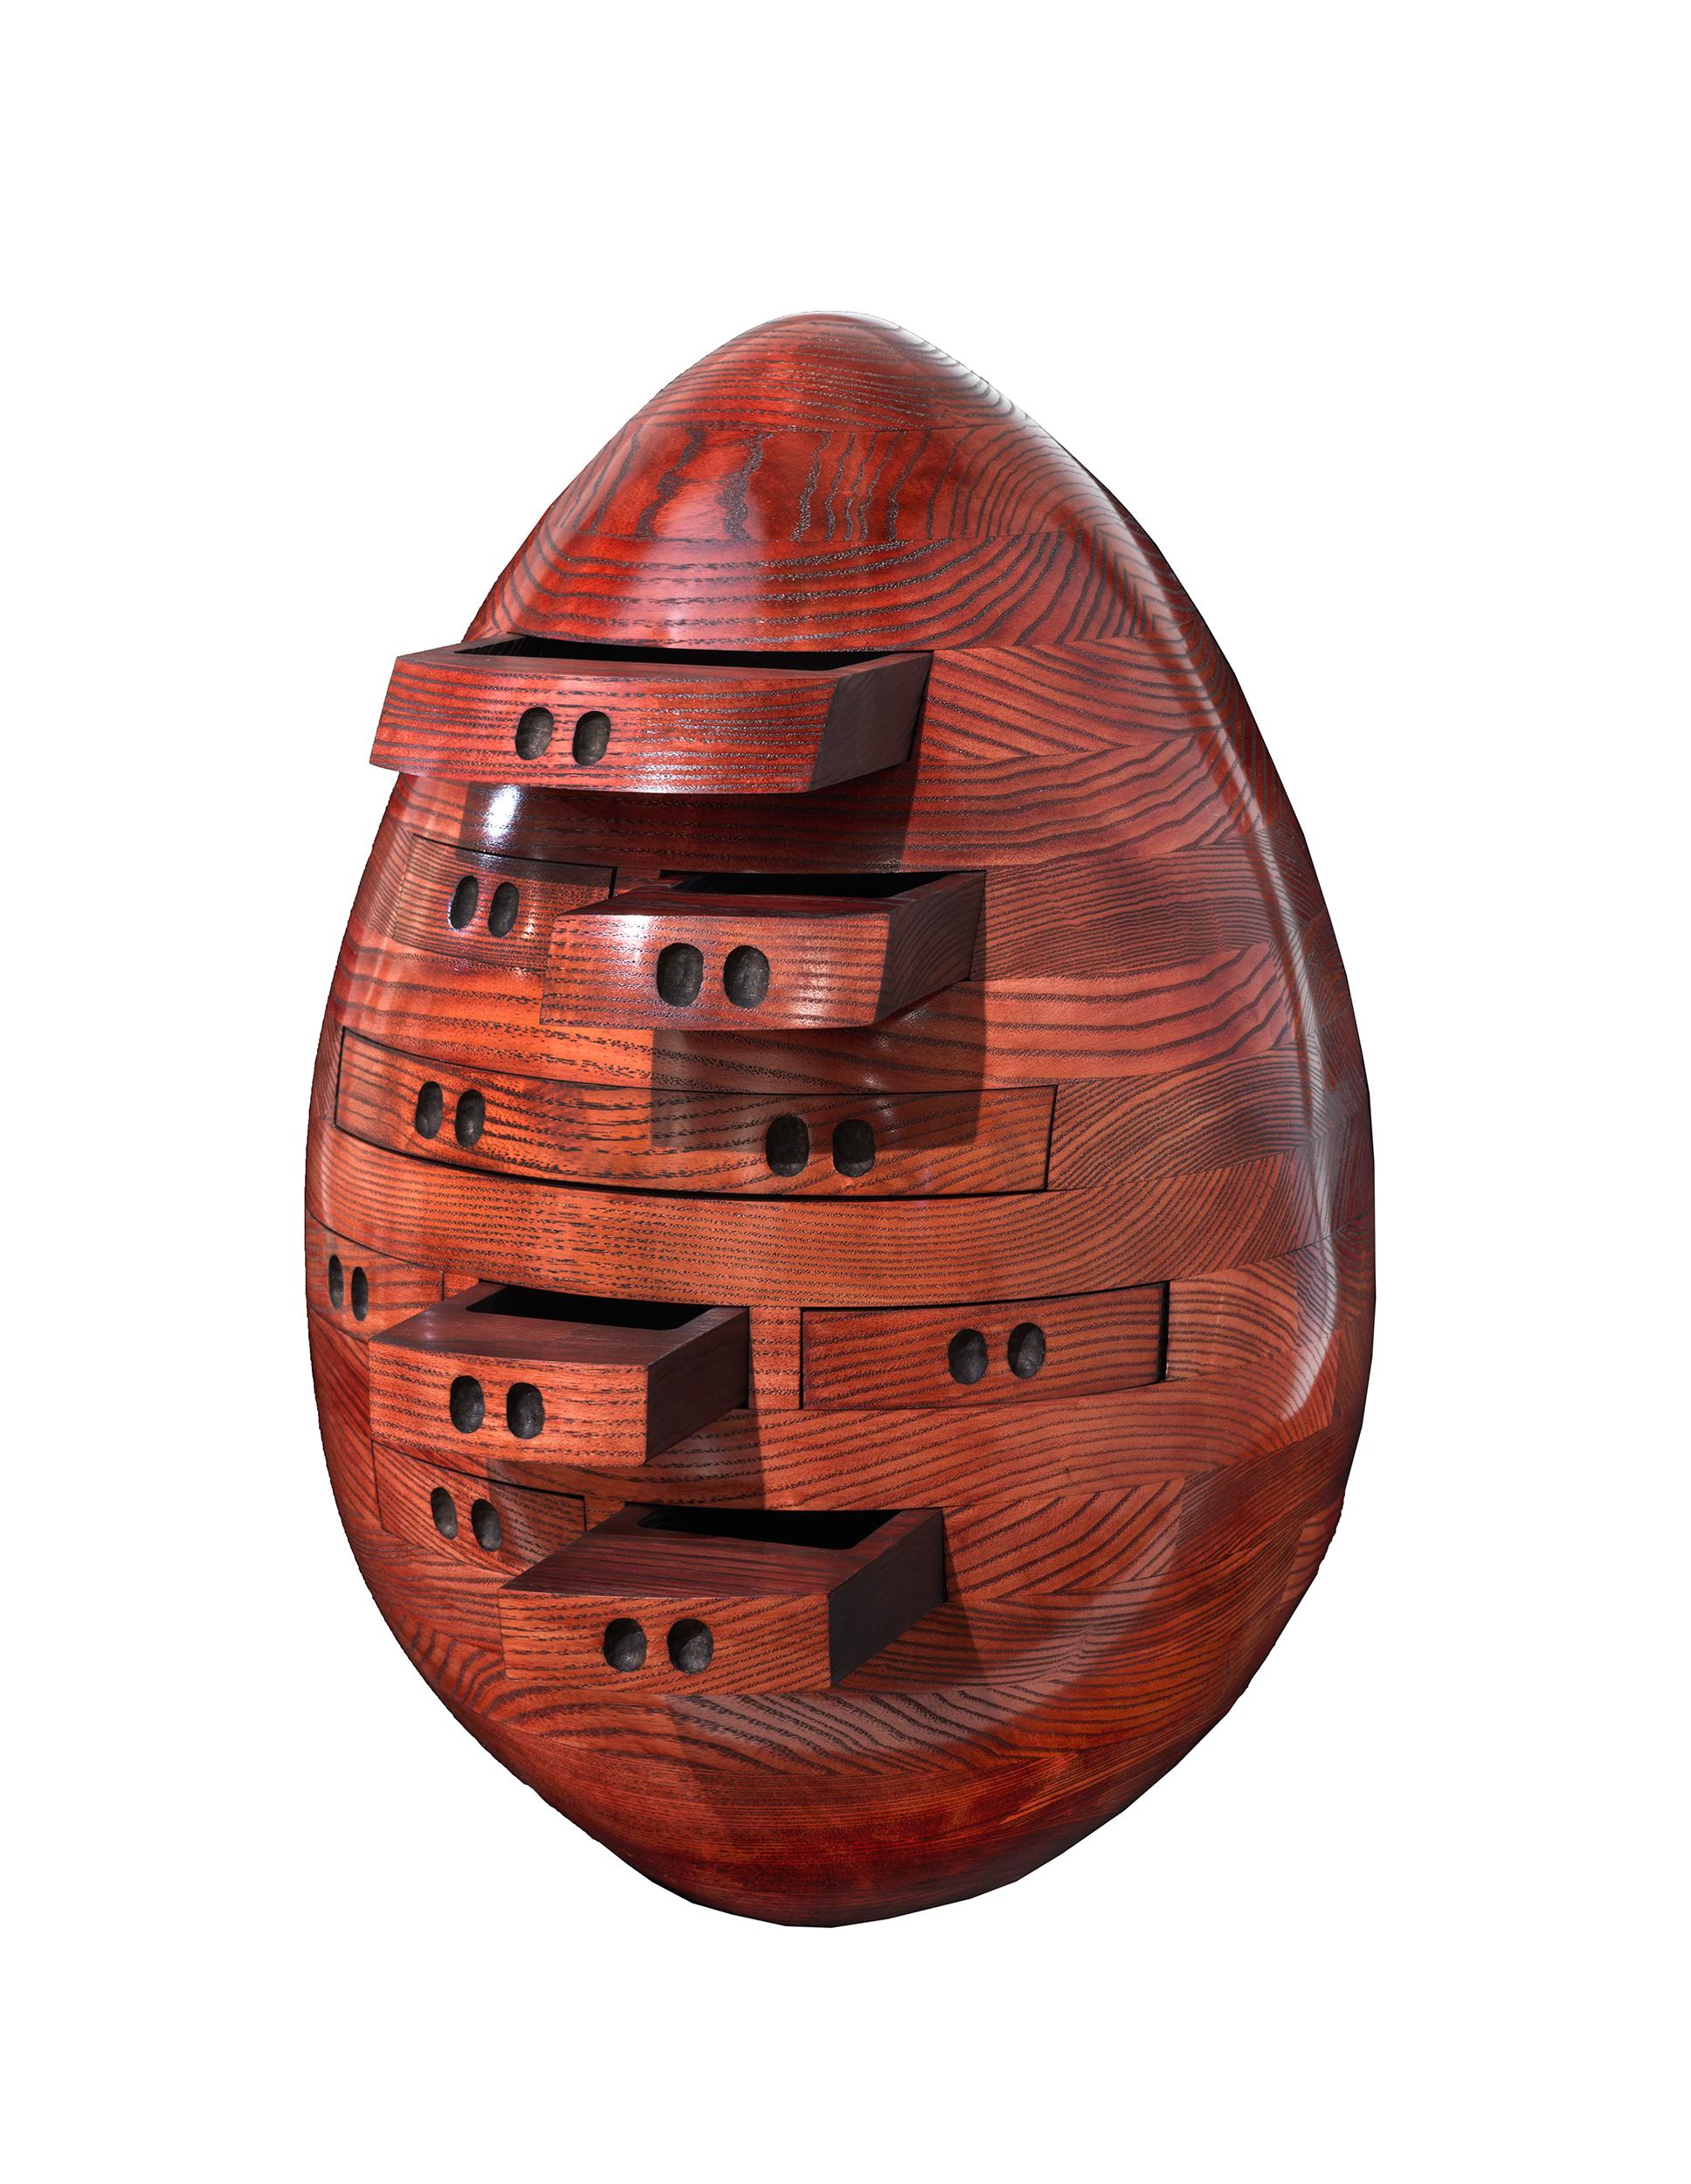 White ash is a hardwood native to North America with light color and even grain, this ovalular sculpture is created from laminating layers of wood and hand carving and shaping the surface to bring out the natural beauty of the wood's graceful